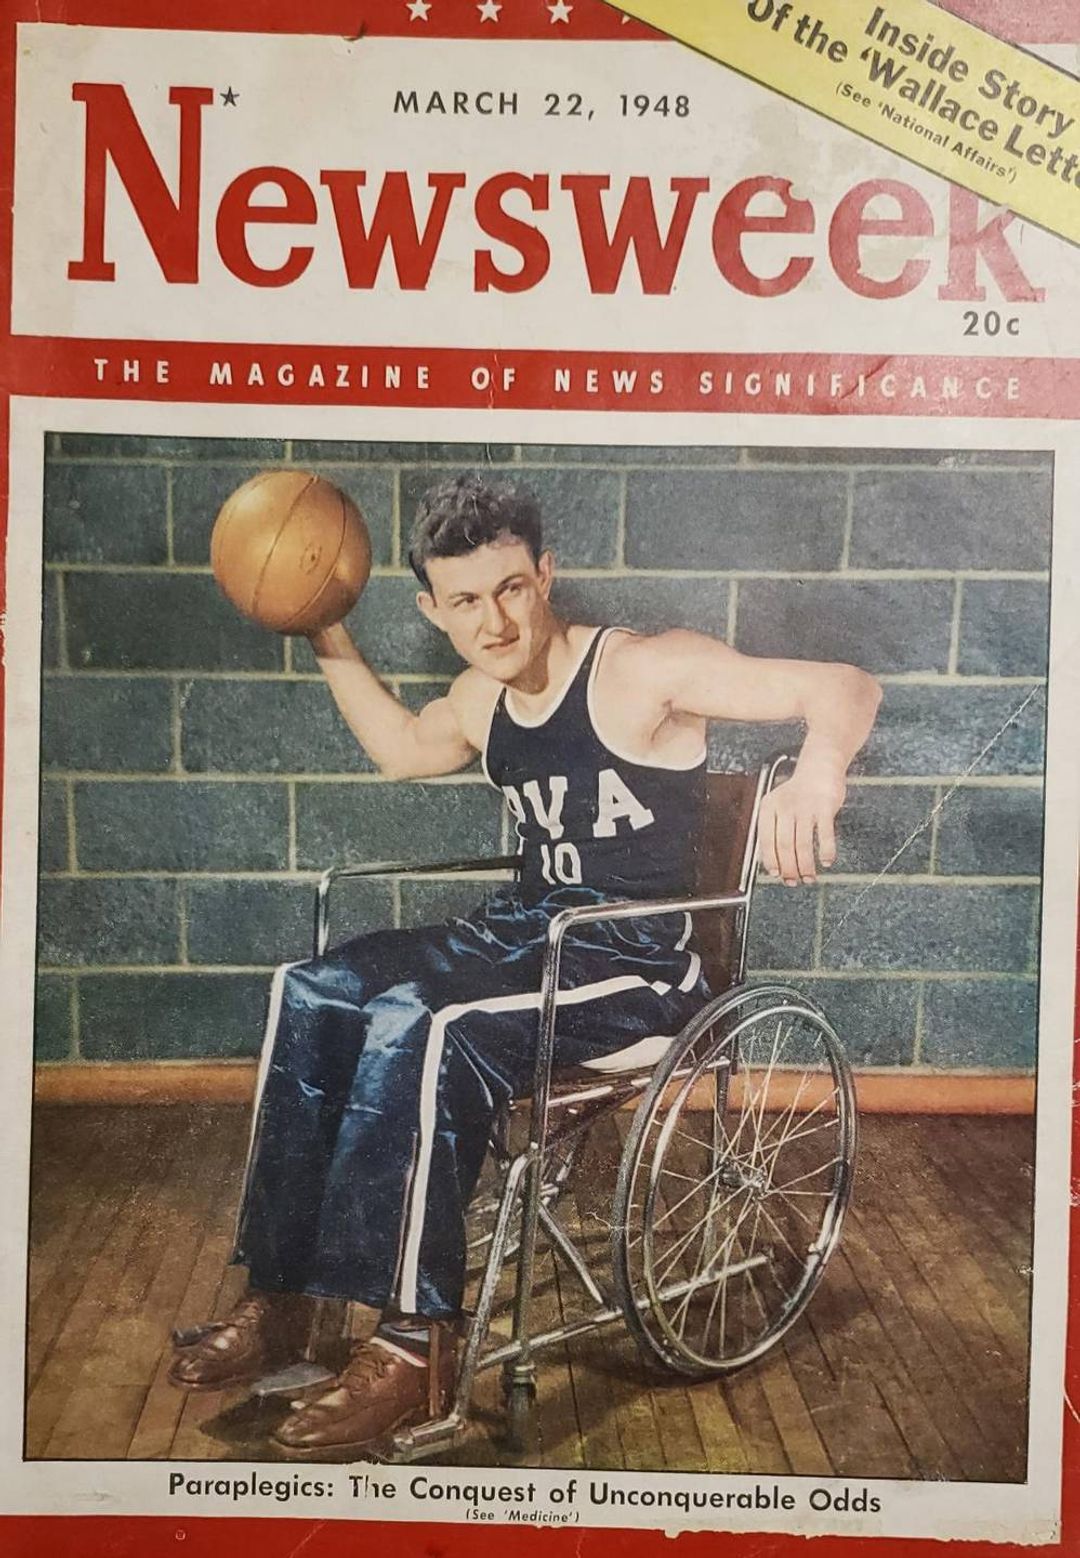 The sport of wheelchair basketball made the cover of Newsweek in 1948, Next Avenue, wheelchair basketball